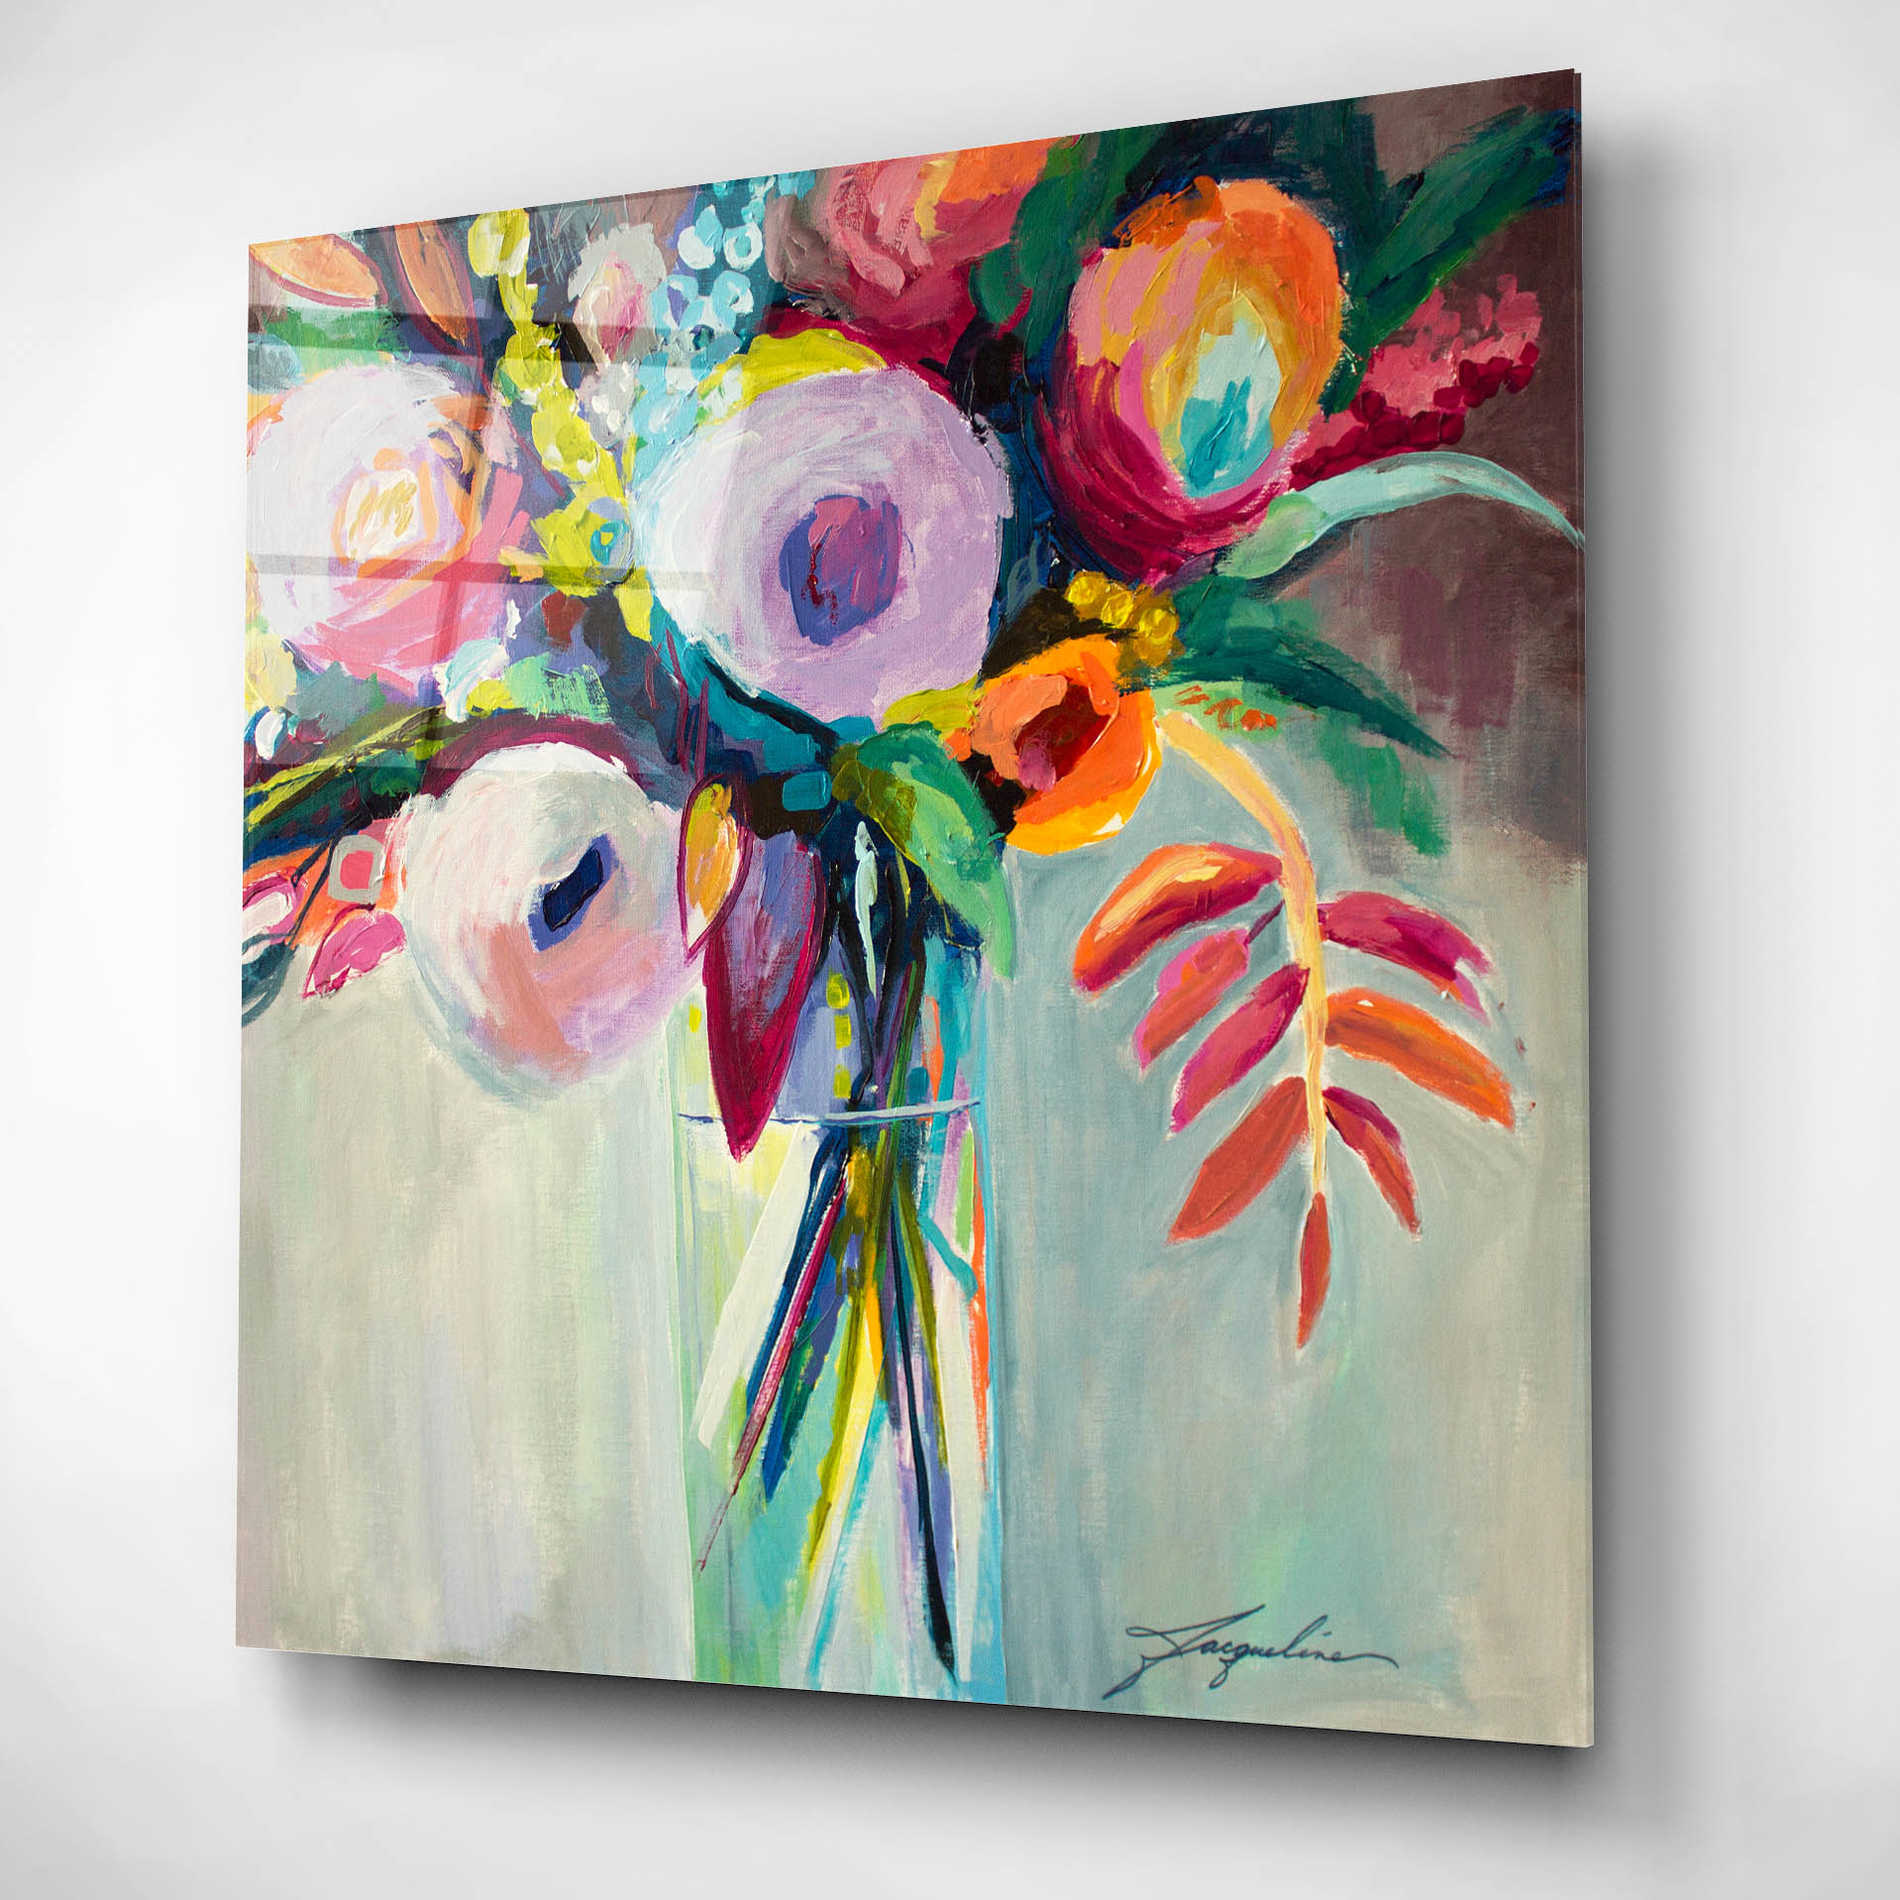 Epic Art 'Ode to Summer 7' by Jacqueline Brewer, Acrylic Glass Wall Art,12x12